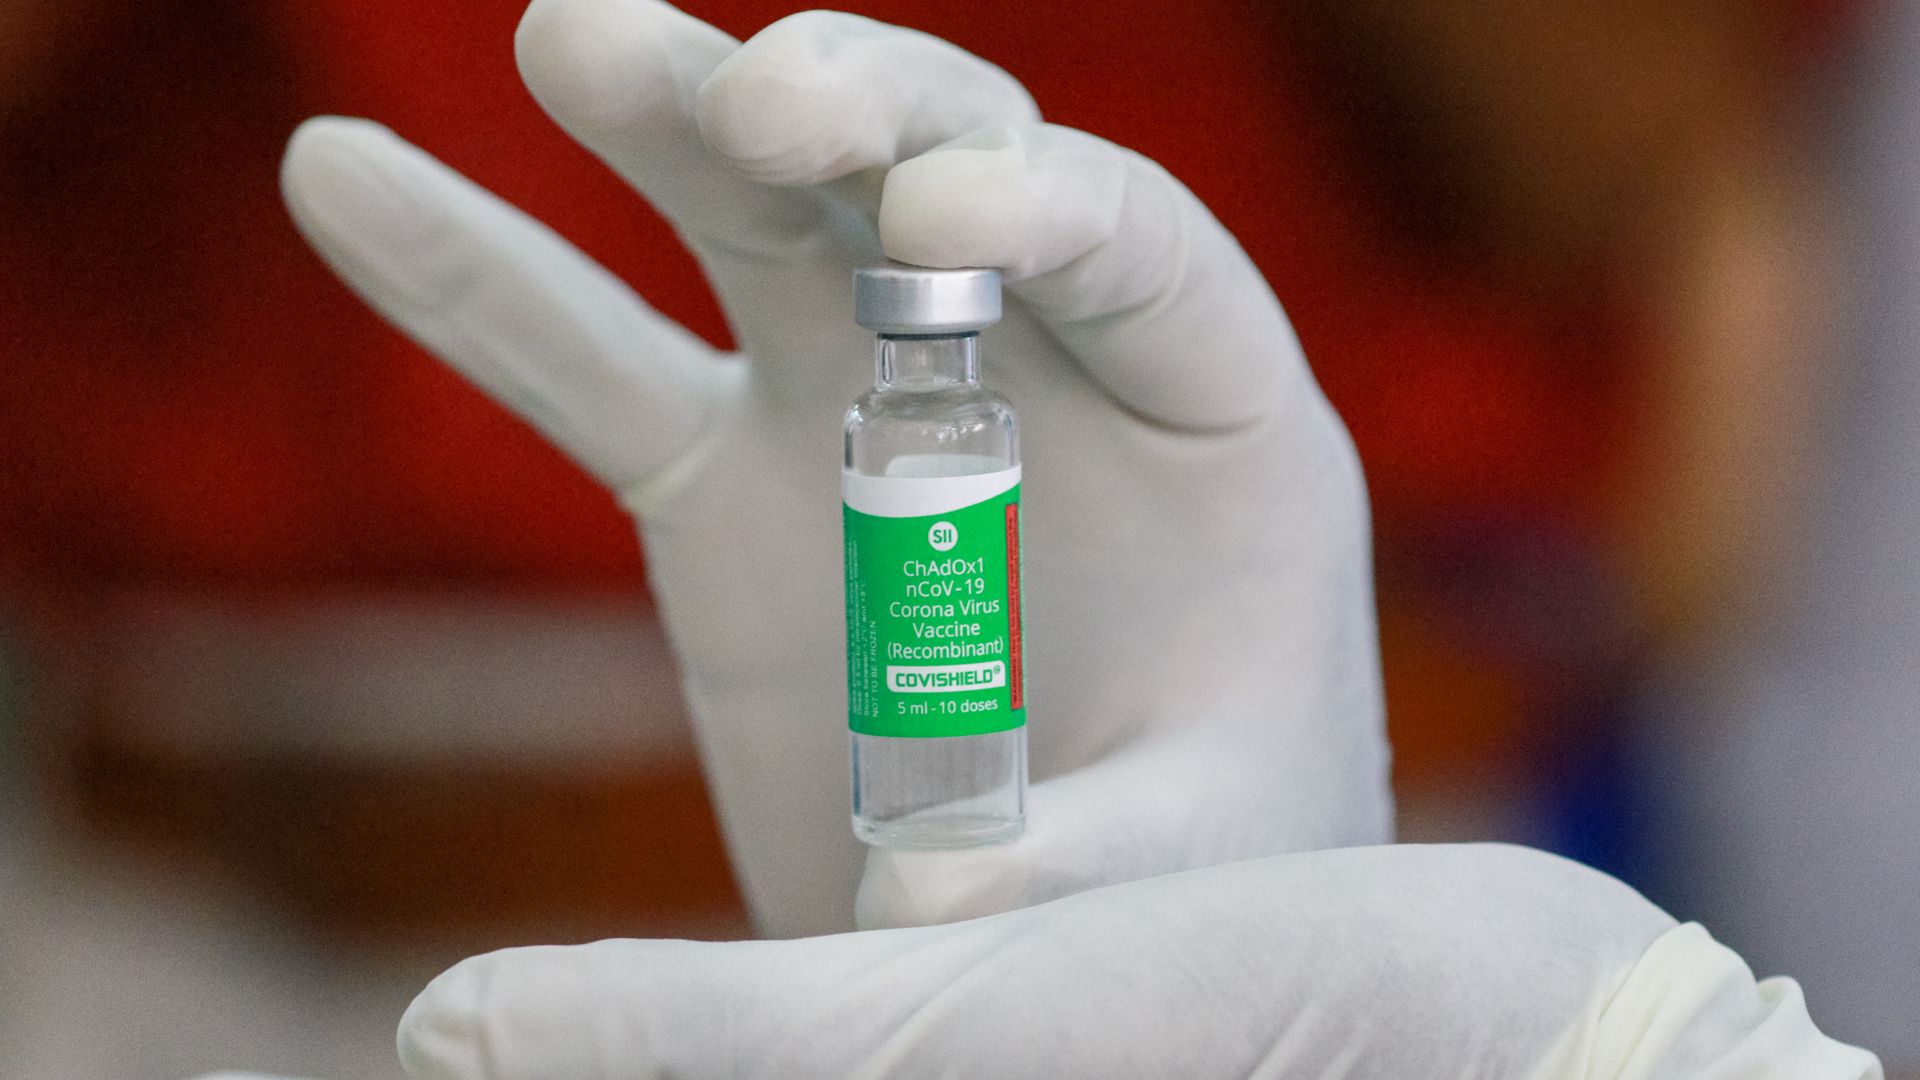 Picture of hands holding an AstraZeneca vial